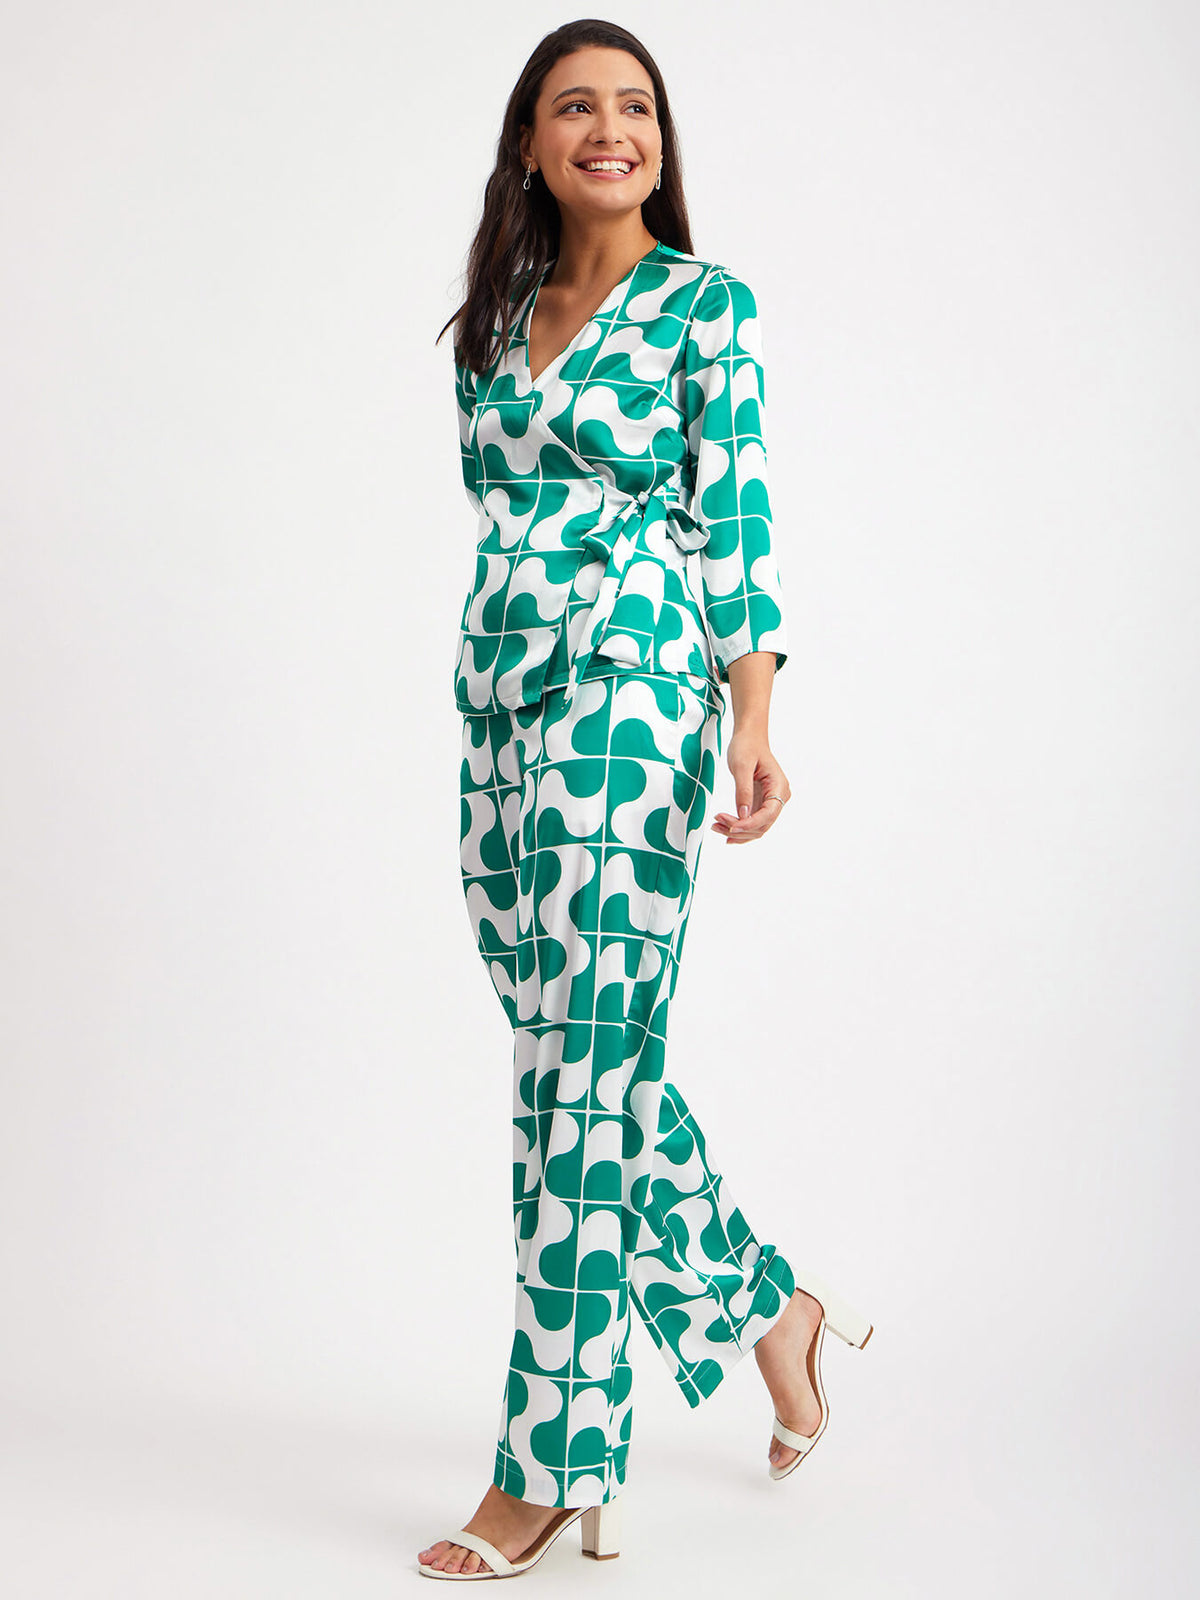 Satin Shirt And Pants Co-ord - Green And White